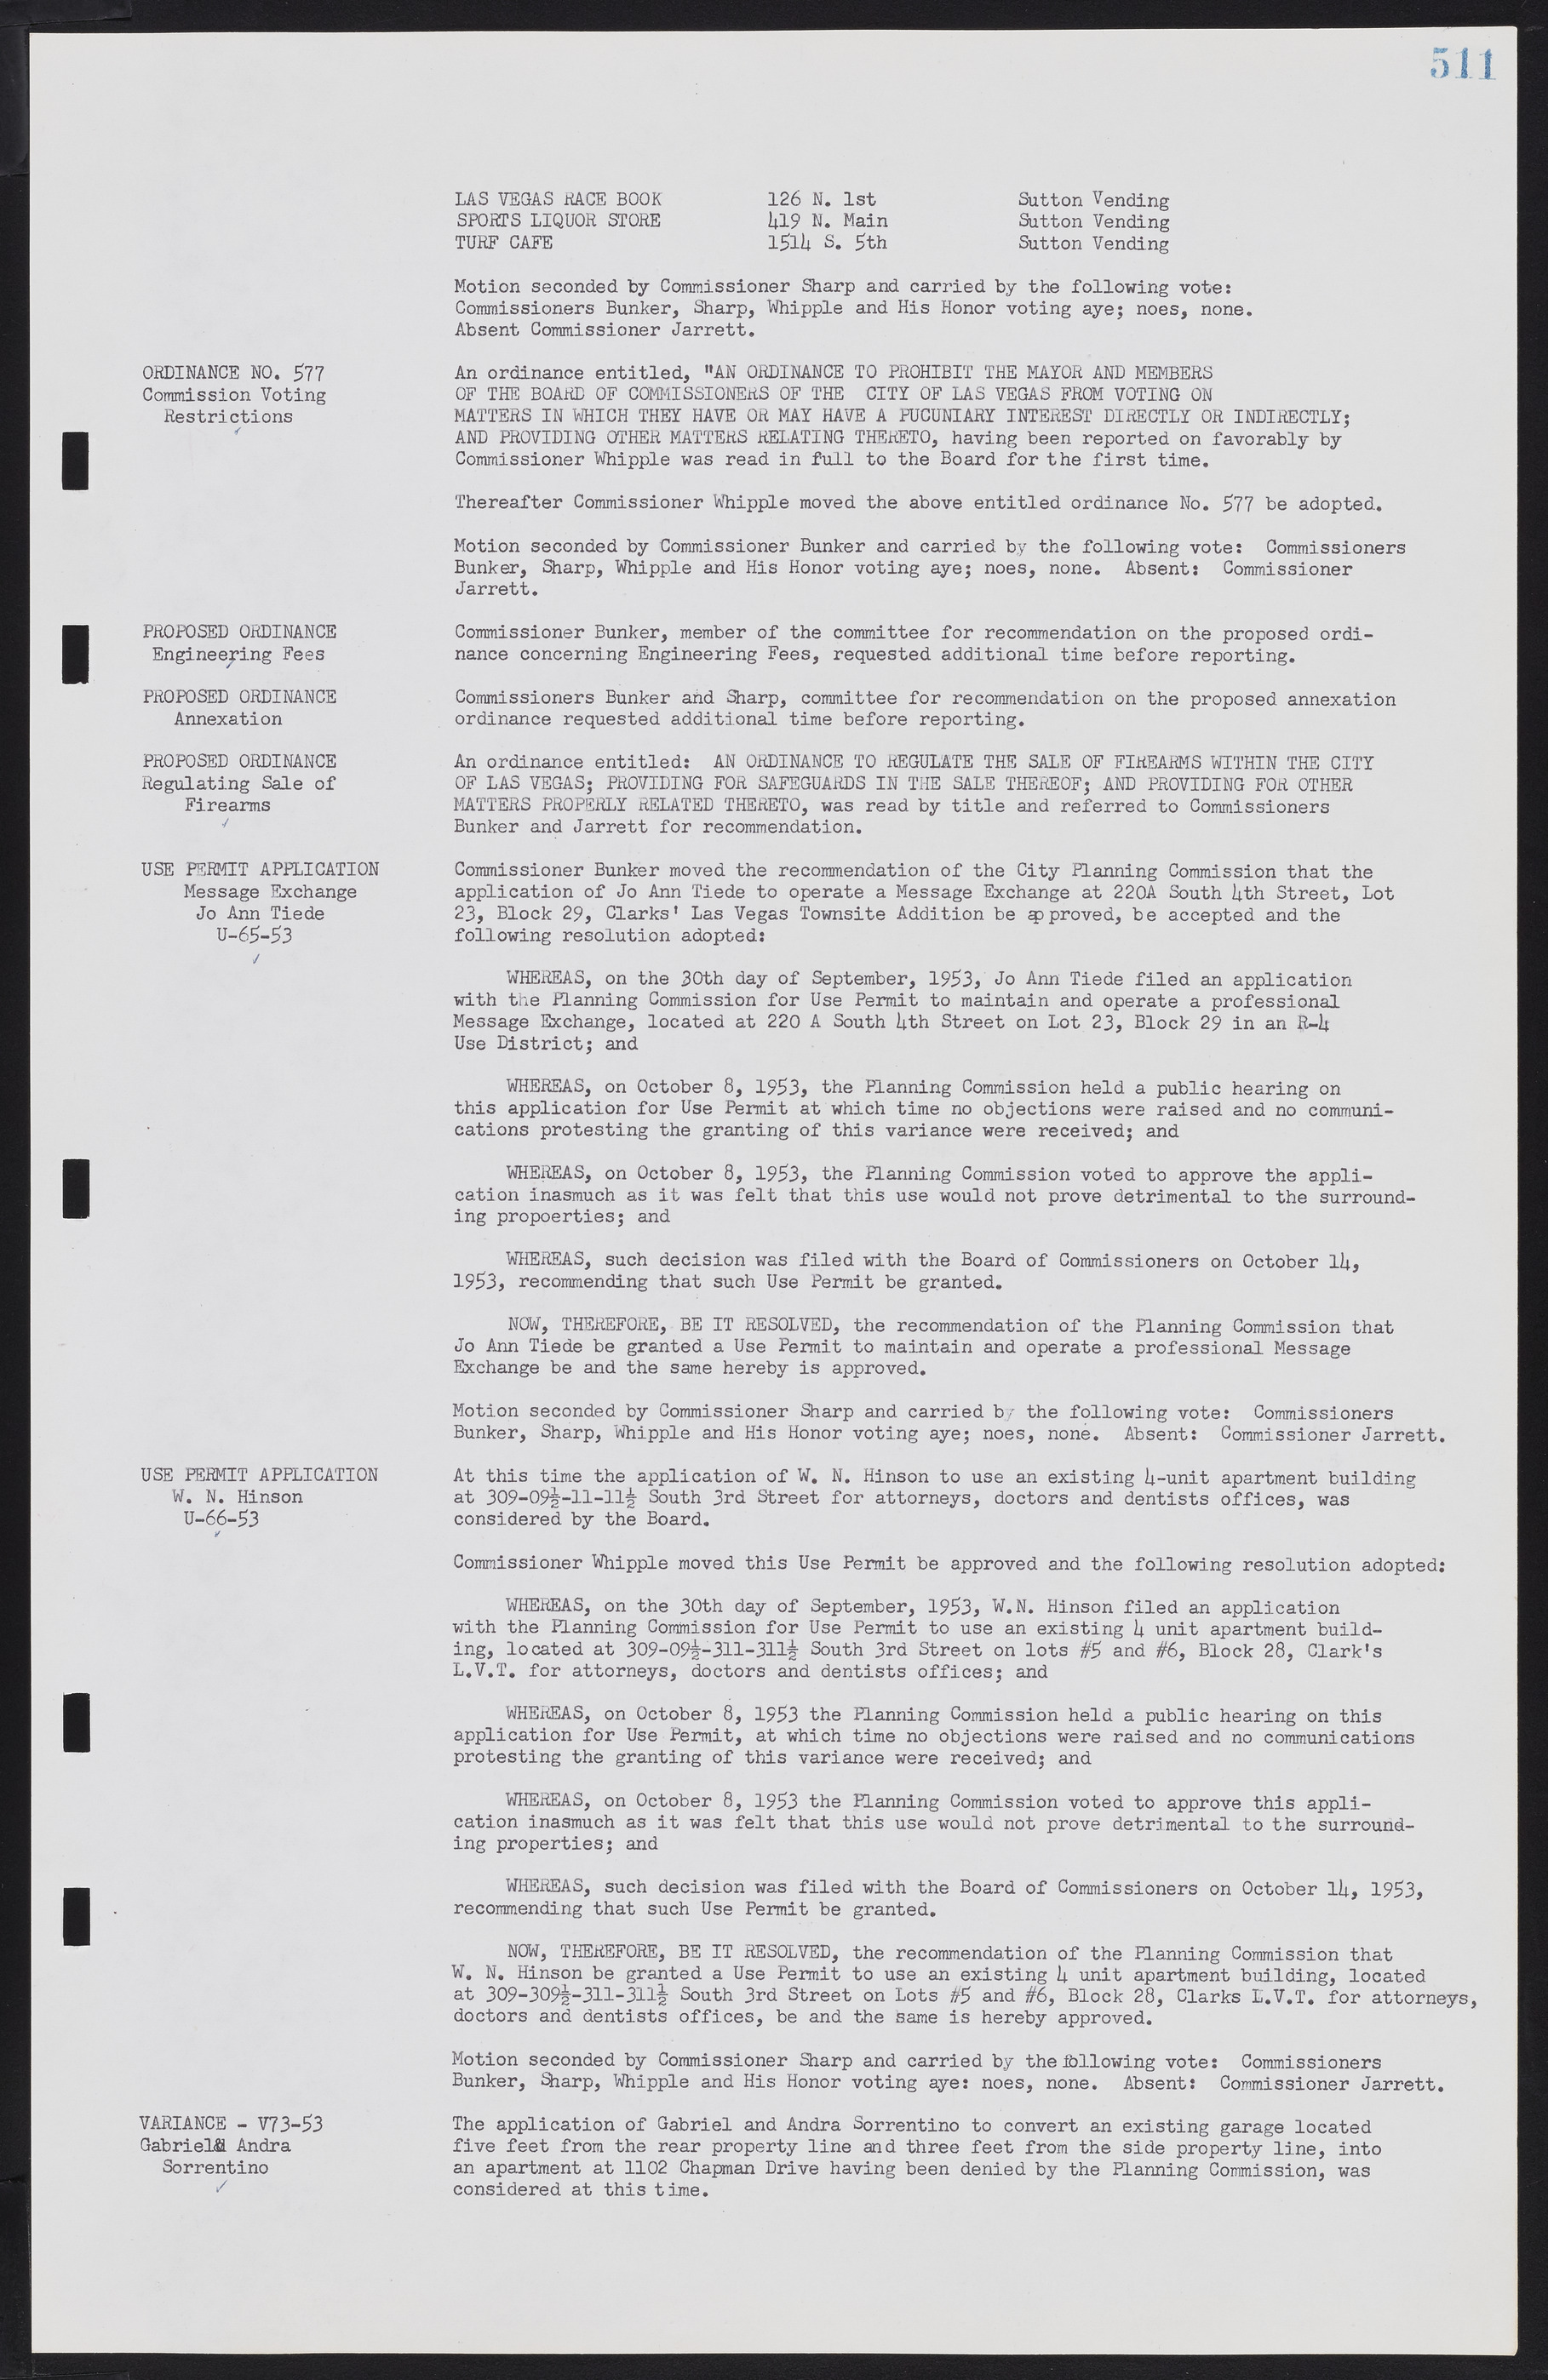 Las Vegas City Commission Minutes, May 26, 1952 to February 17, 1954, lvc000008-541